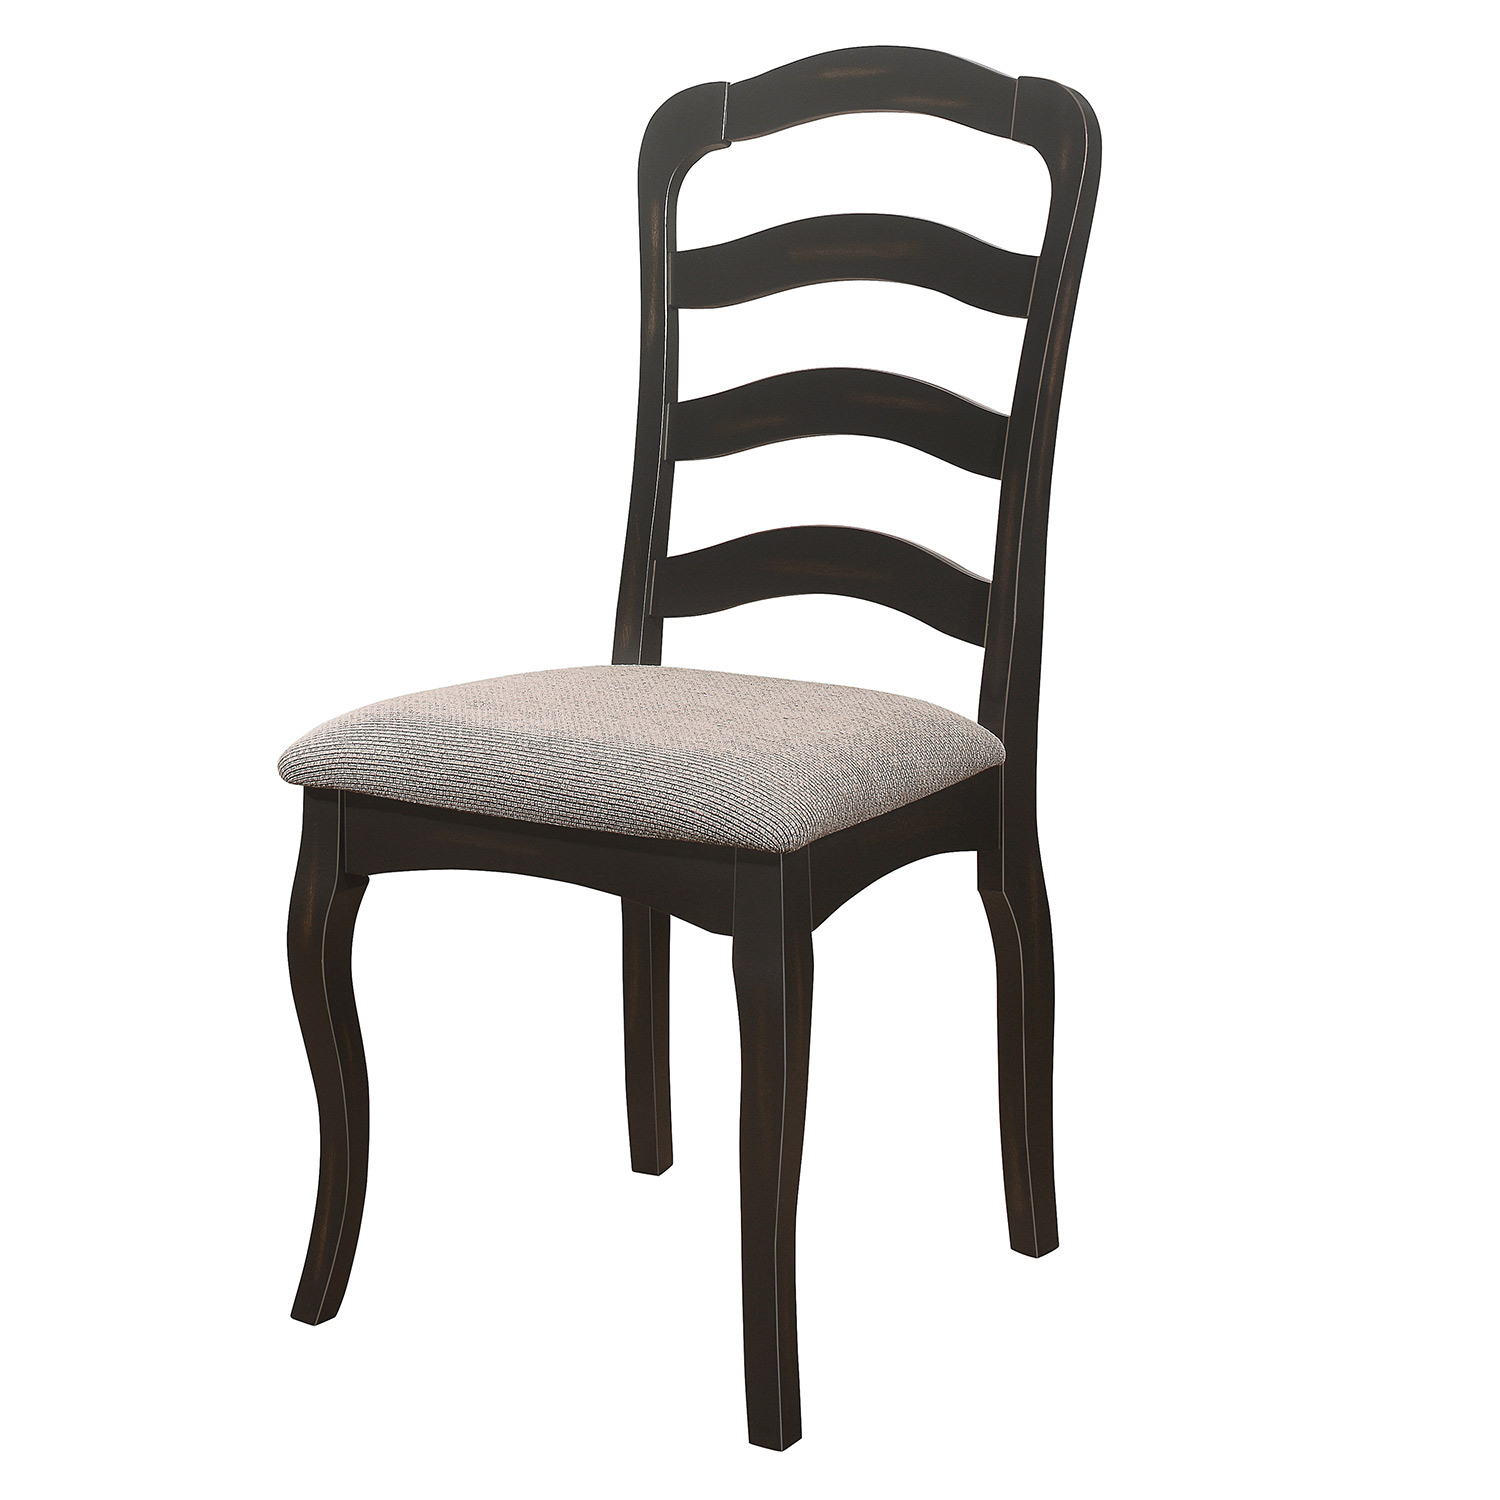 Homelegance Coring Side Chair - Antique